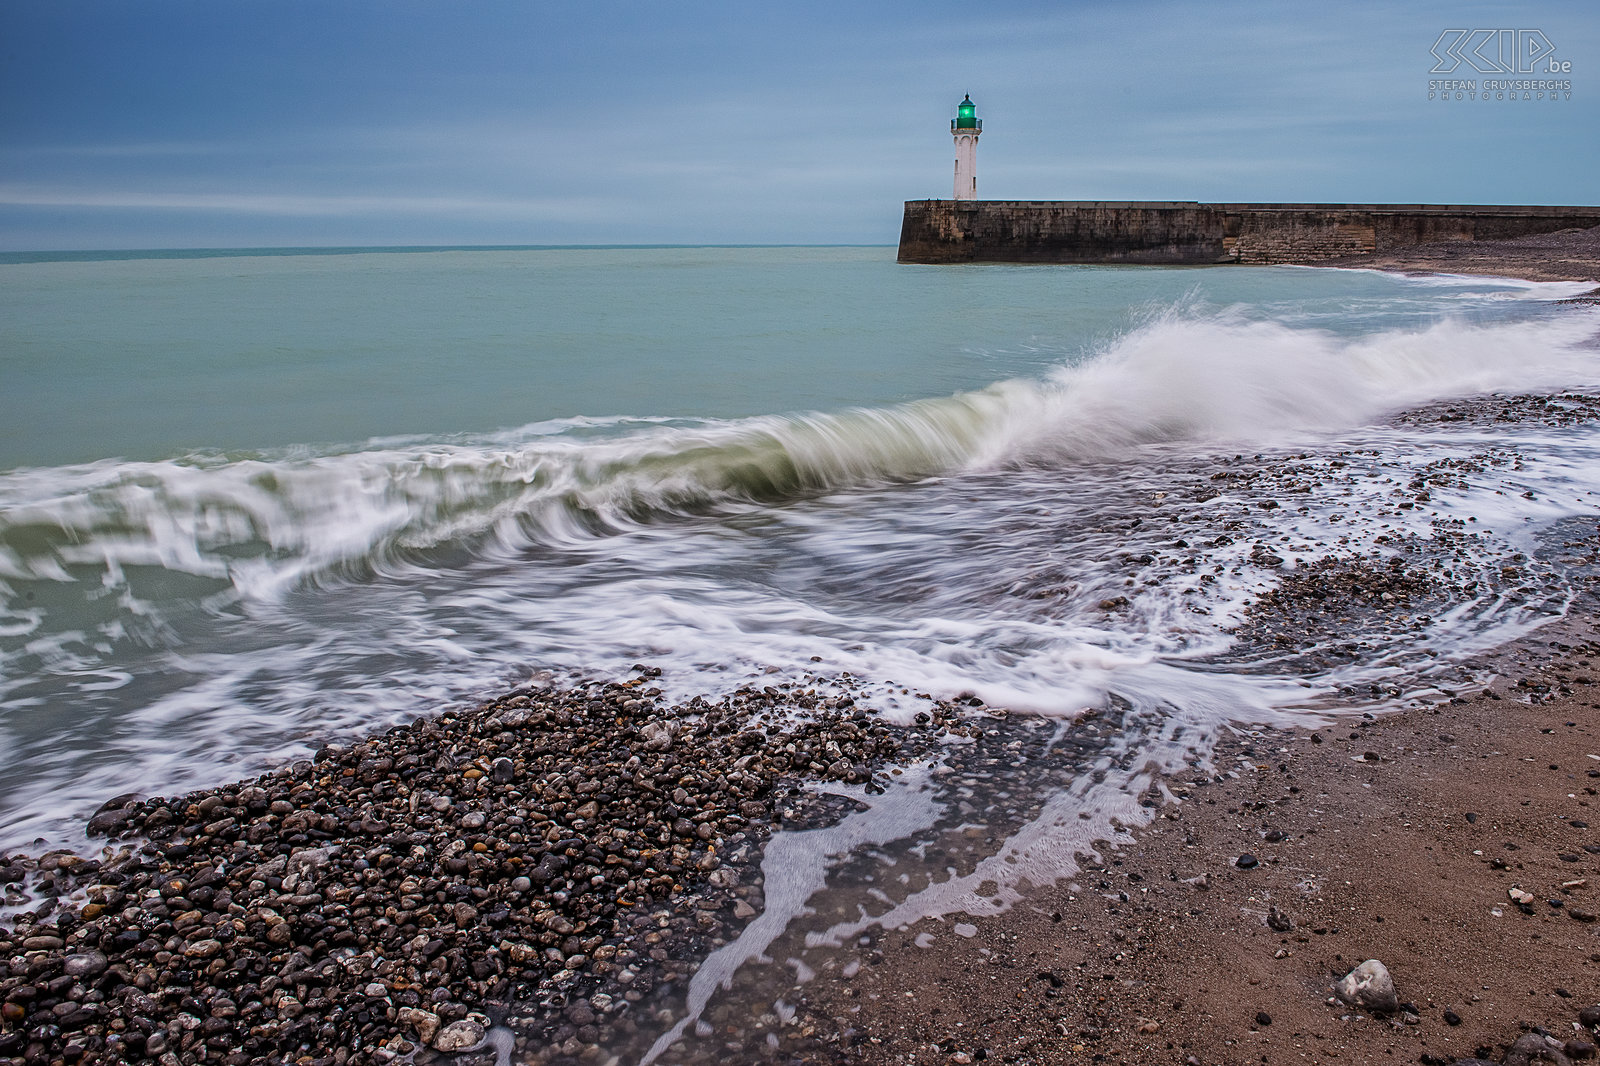 Normandy coast and Nieuwpoort - Lighthouse Saint-Valery-en-Caux An early morning near the small but picturesque lighthouse at the small fishing port of Saint Valery-en-Caux in Normandy. Stefan Cruysberghs